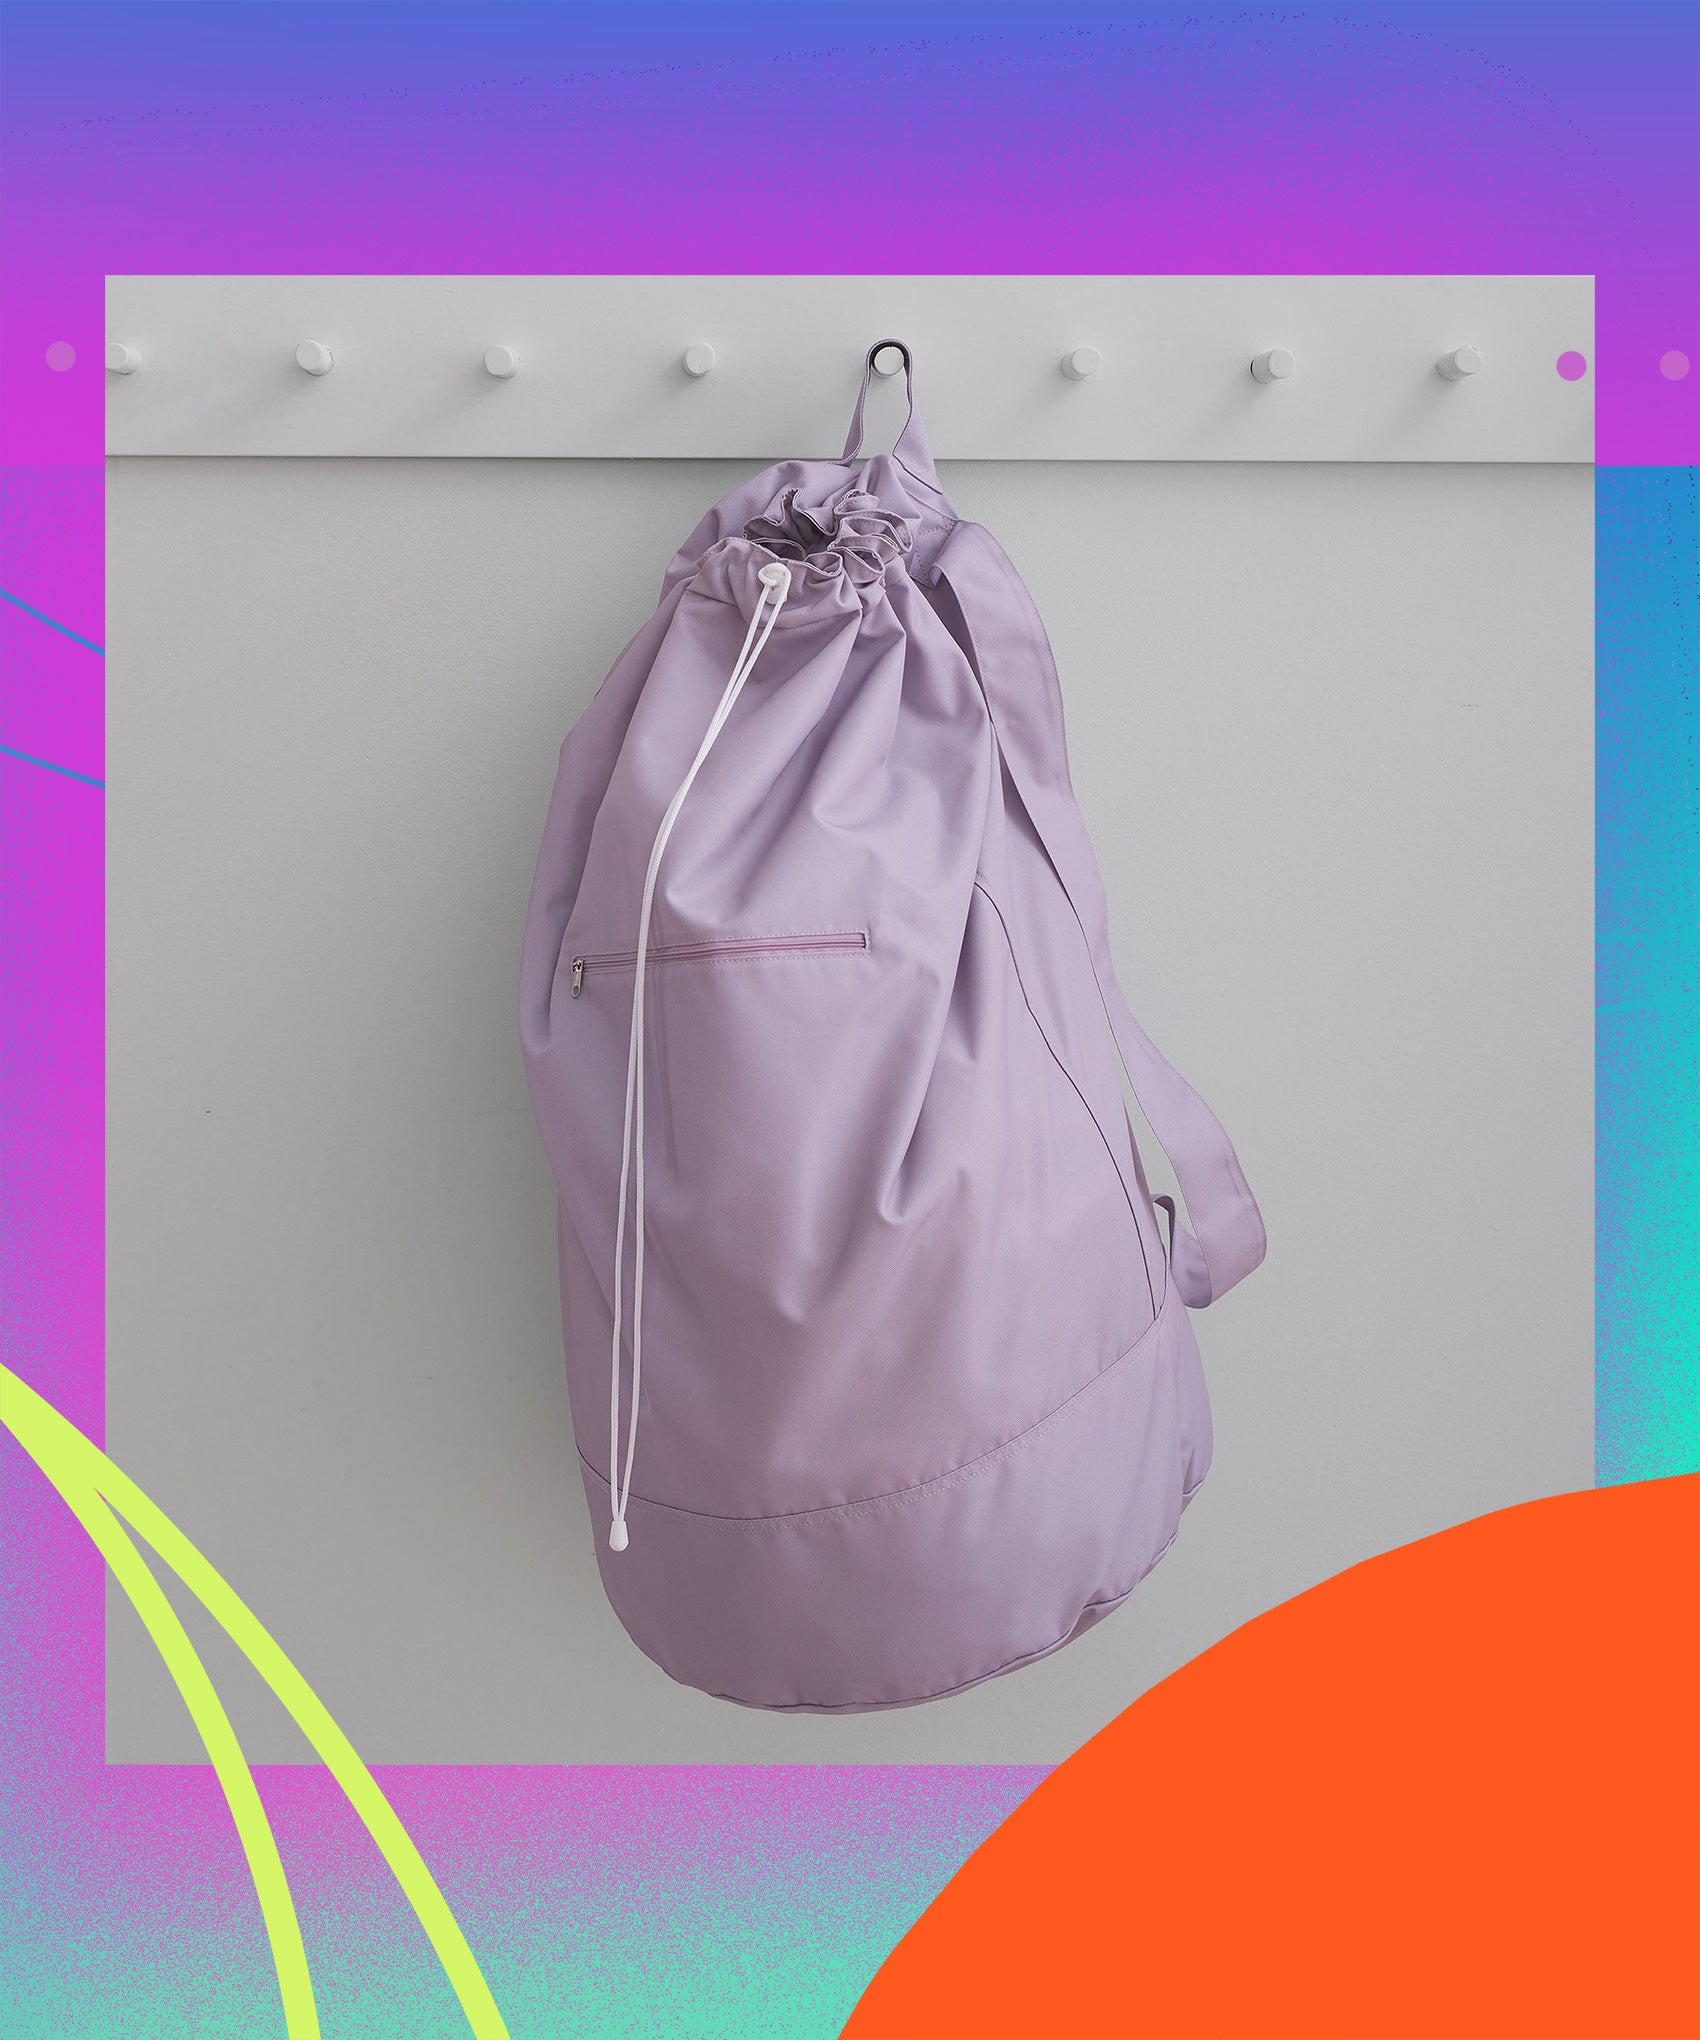 Non-Woven Laundry Duffel Bag with Over The Shoulder Strap